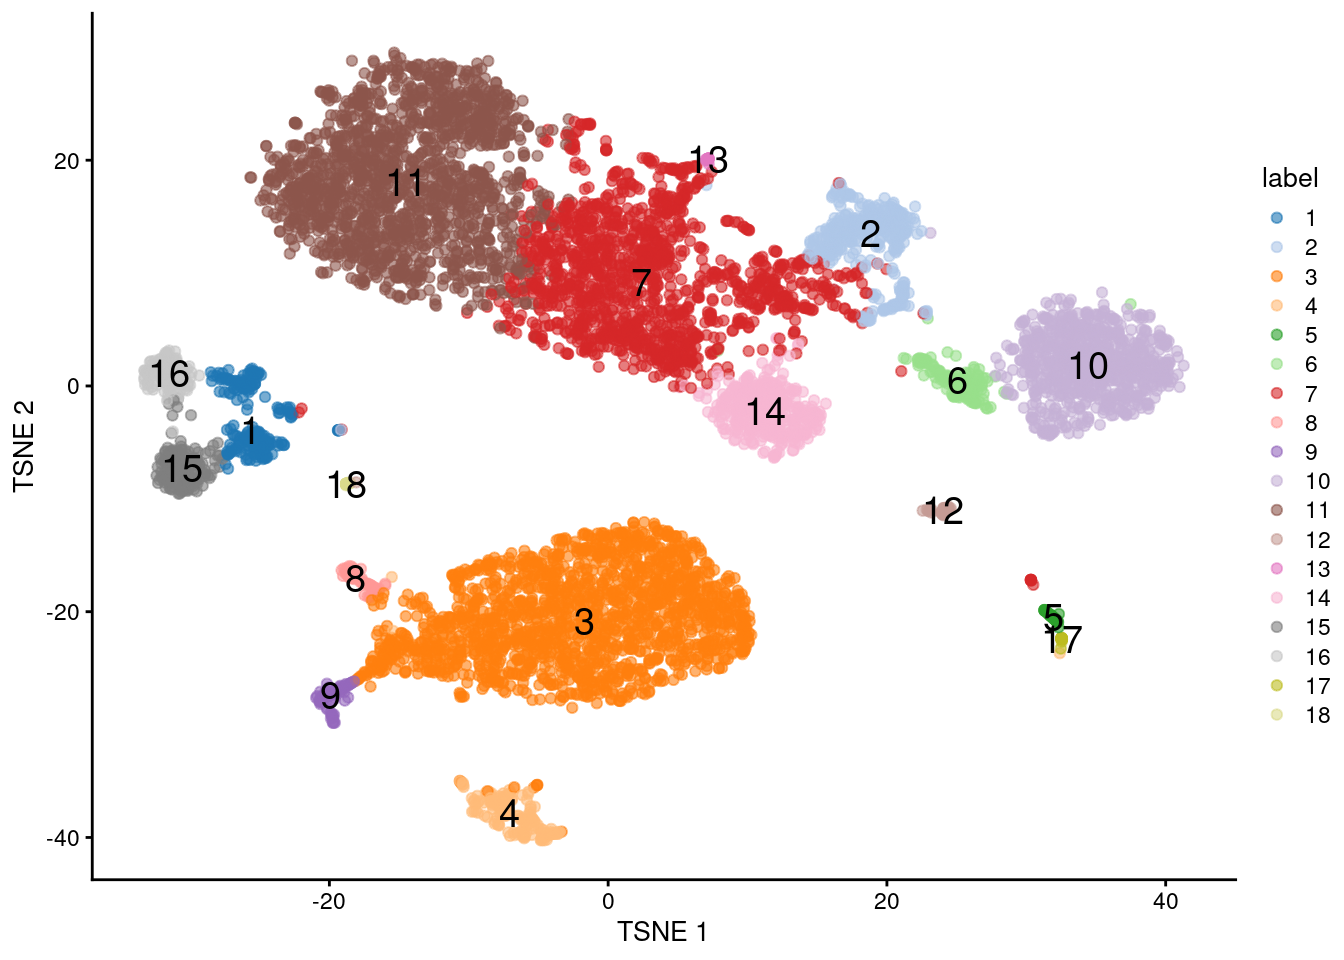 $t$-SNE plot of the PBMC dataset based on the transcript data. Each point is a cell and is colored according to the assigned cluster.